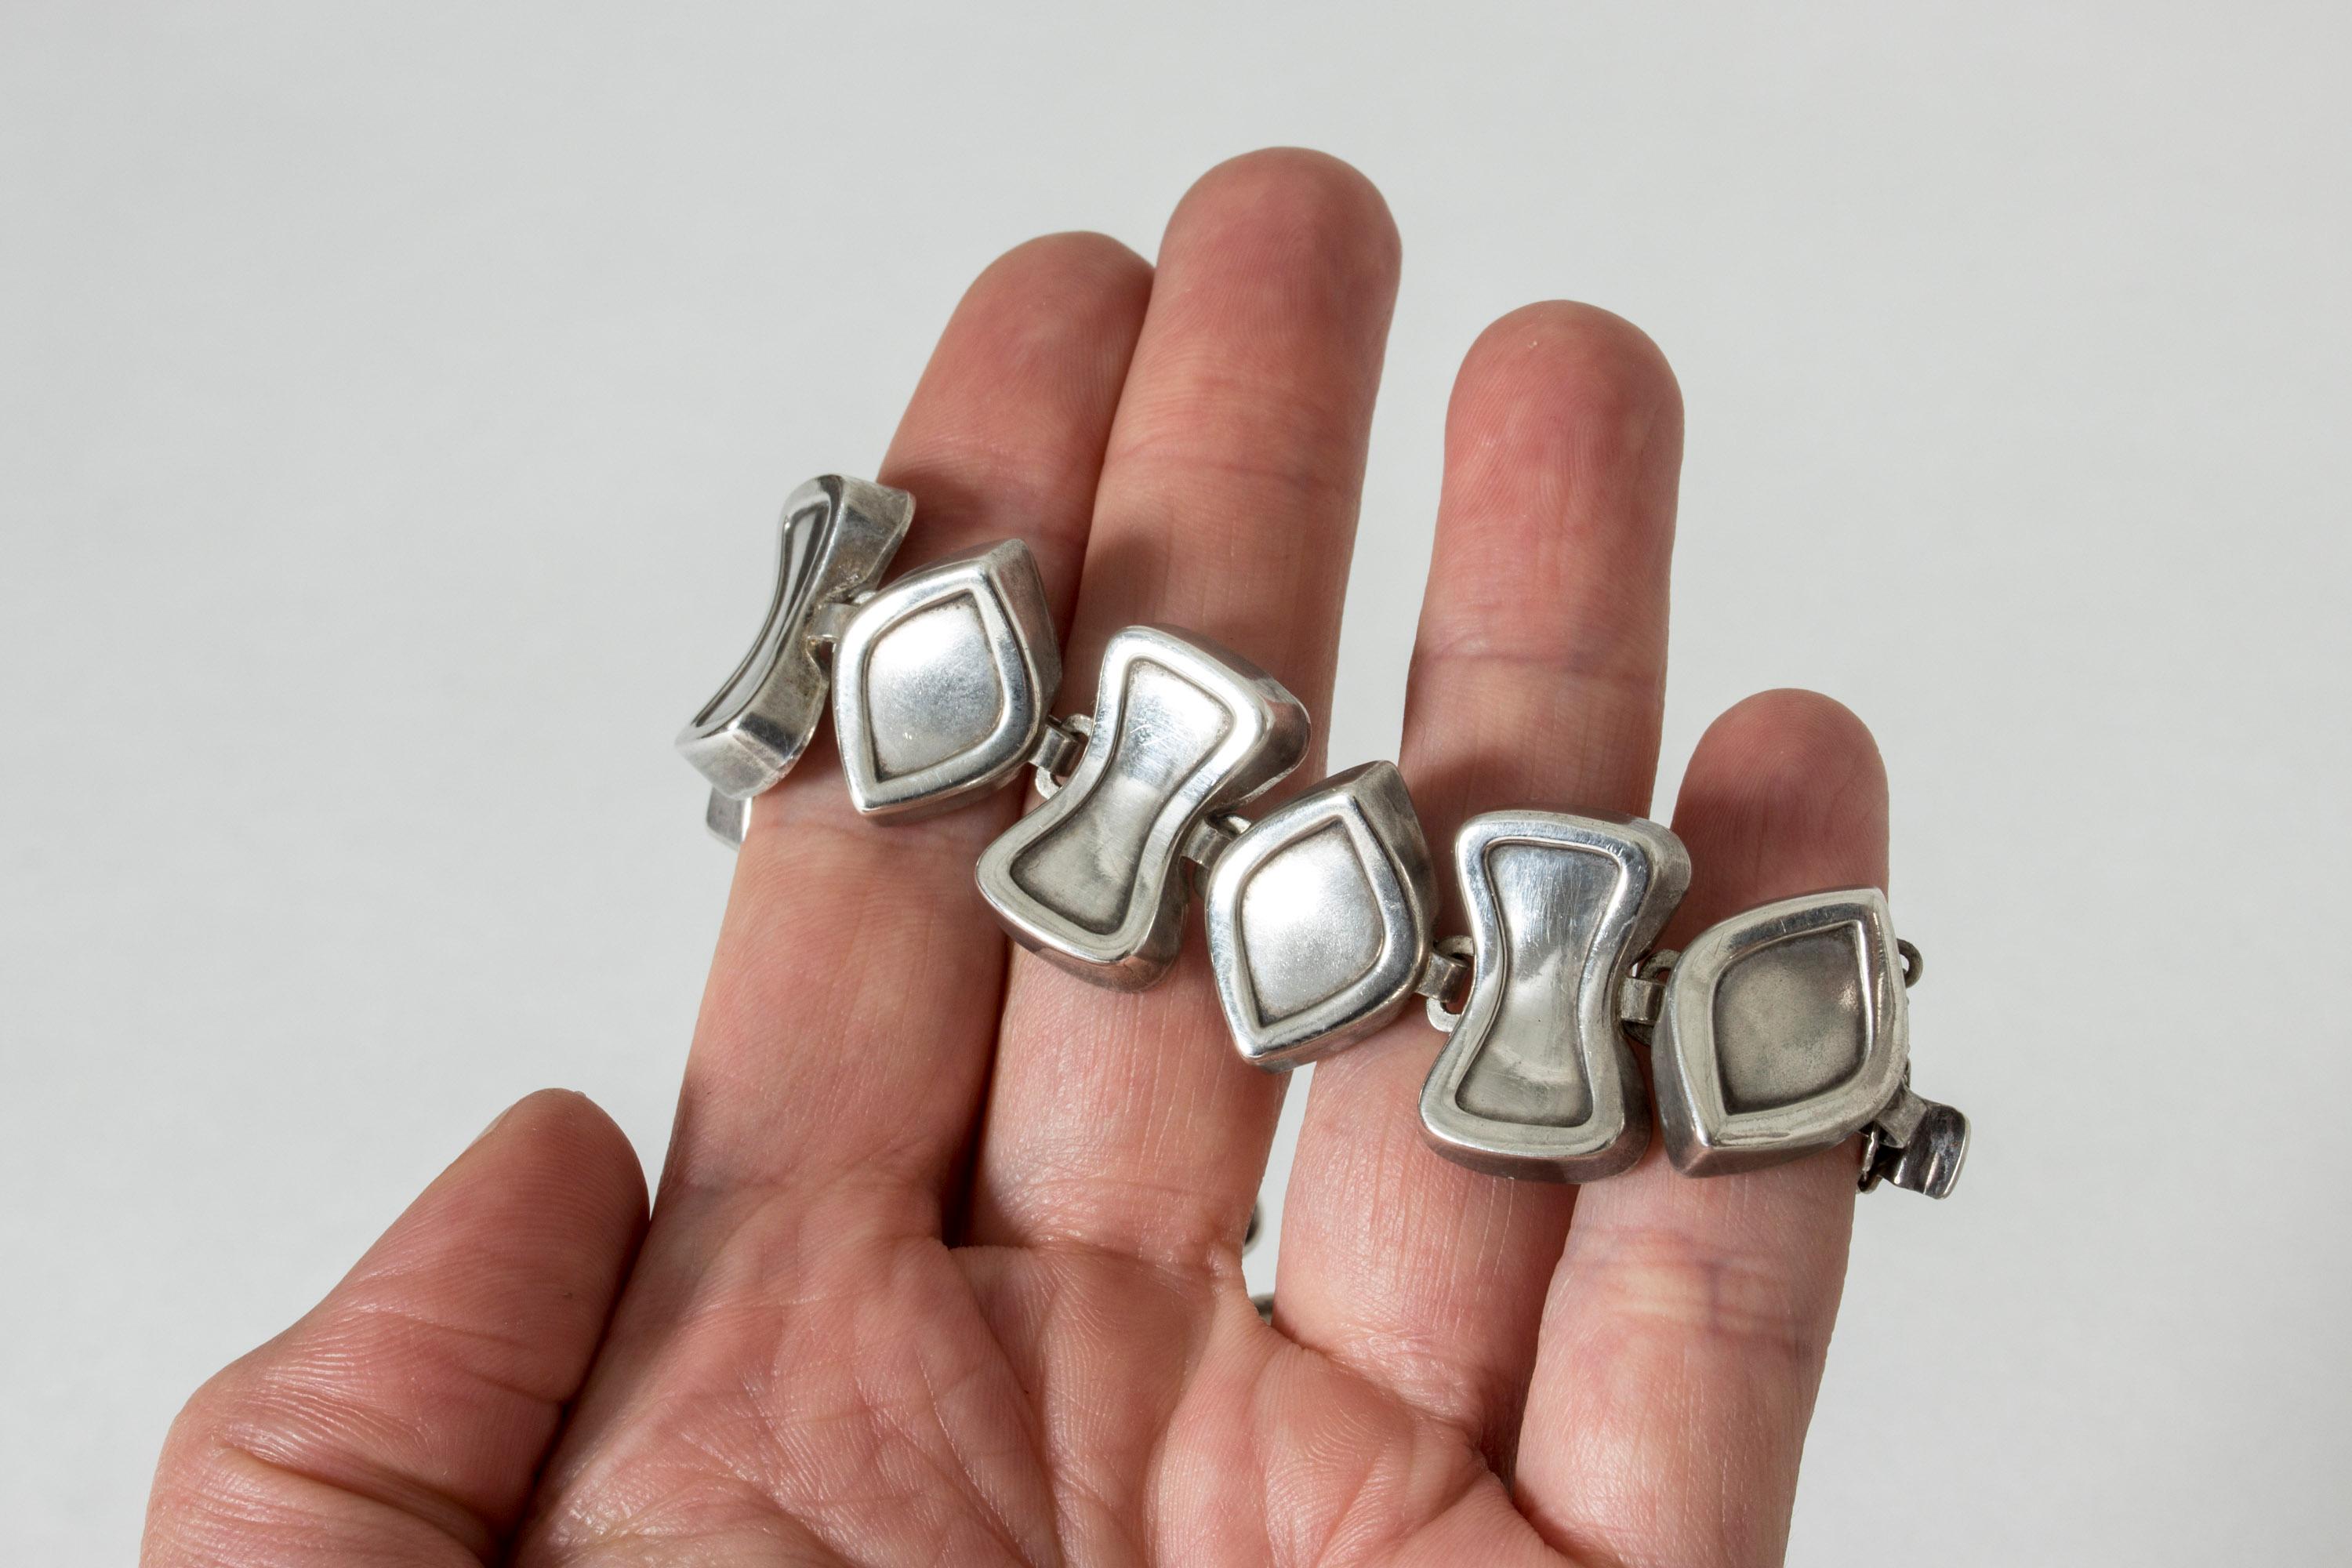 Amazing silver bracelet from Atelier Borgila, in a design of abstract shapes. Playful and cool, feels great to wear.